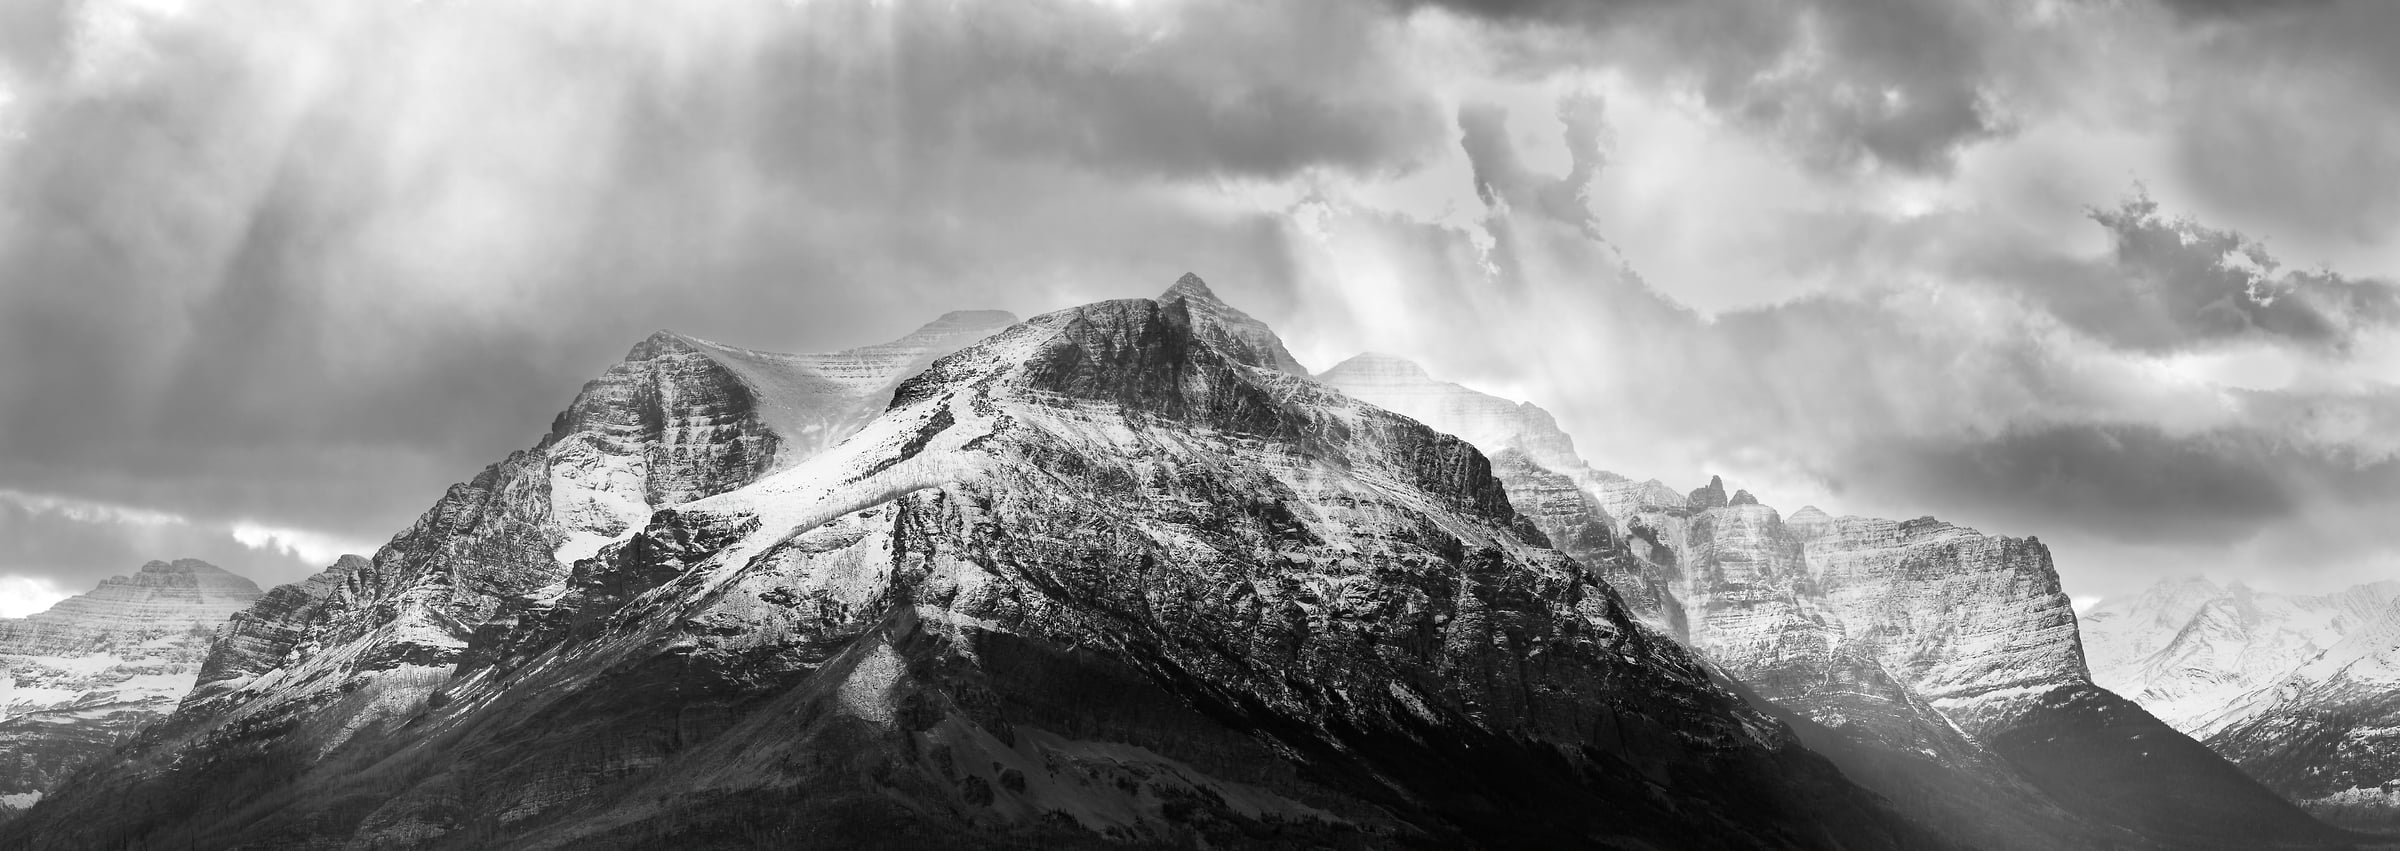 276 megapixels! A very high resolution, large-format VAST photo print of a mountain range with sun rays streaming onto it; black & white landscape photograph created by David David in Glacier National Park, Montana.